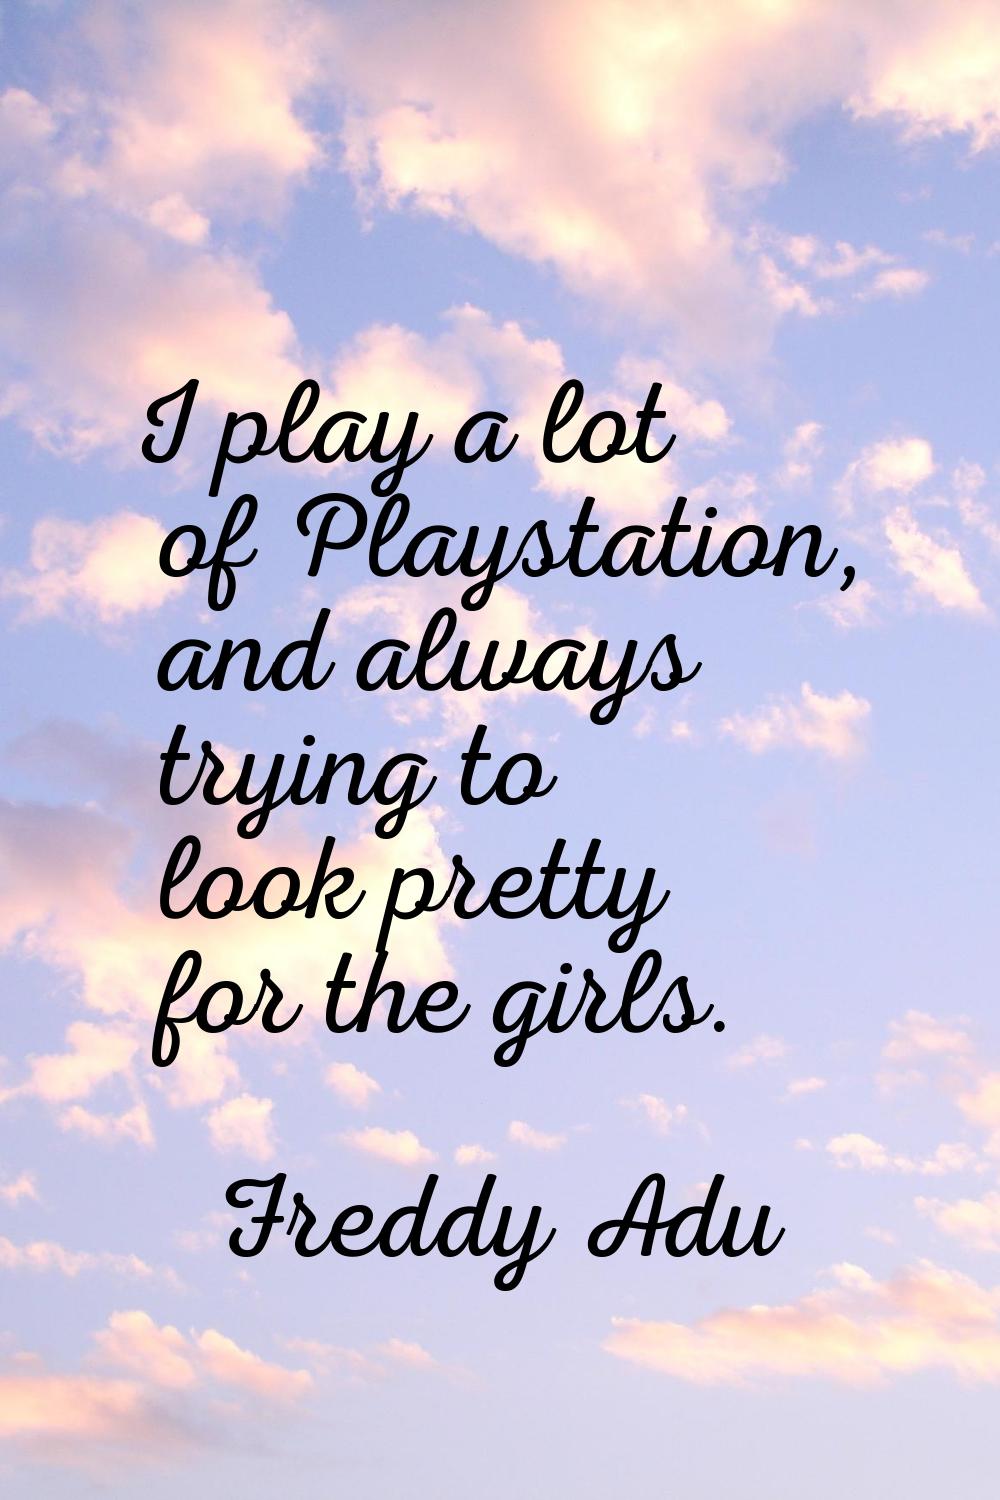 I play a lot of Playstation, and always trying to look pretty for the girls.